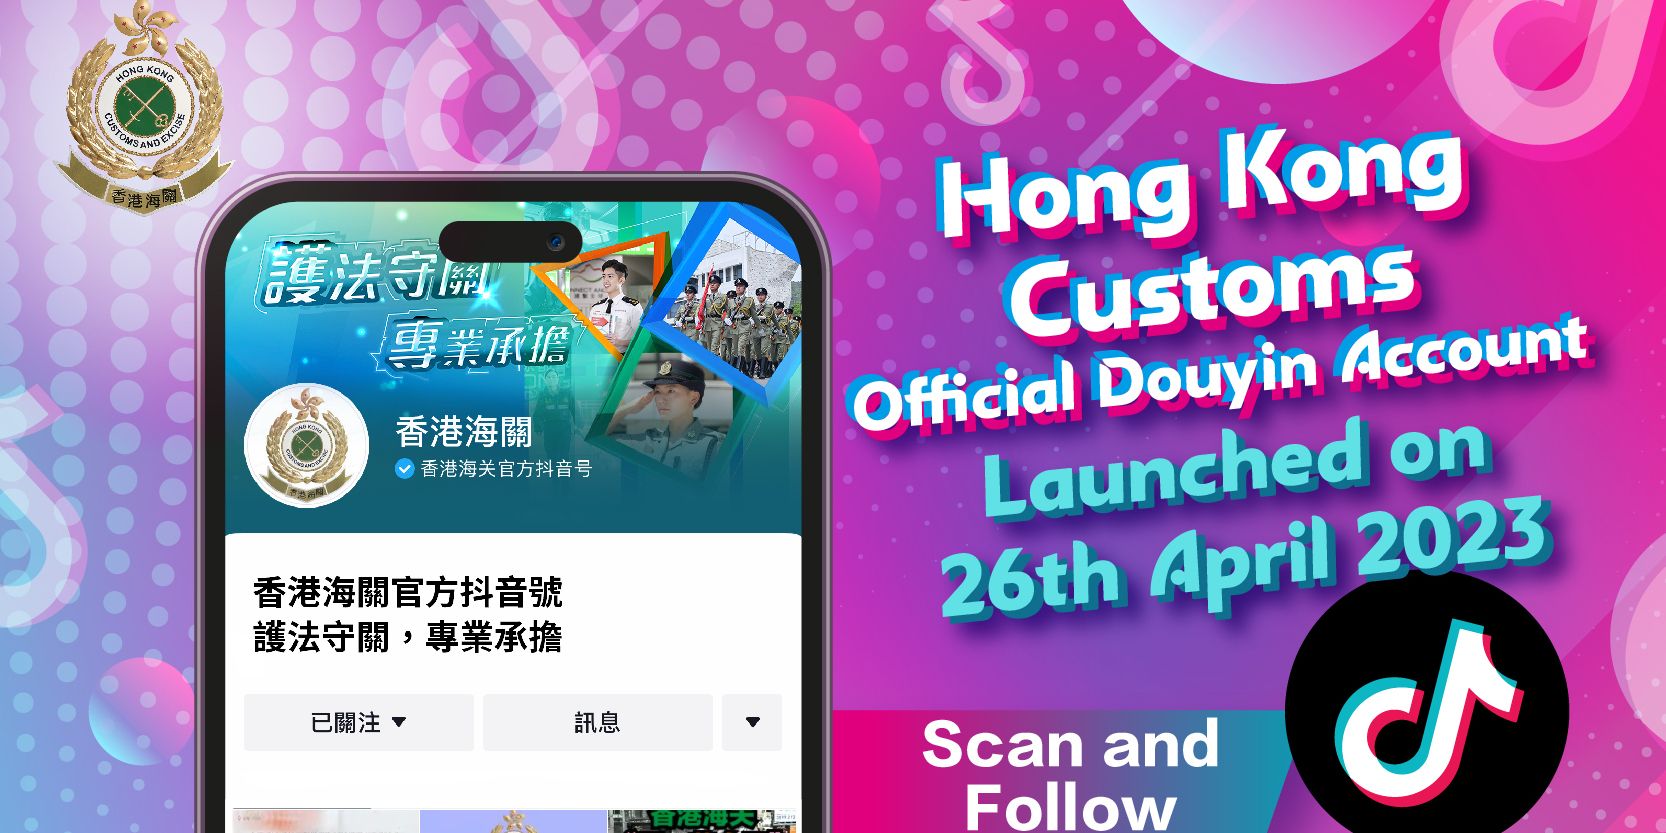 Official Douyin and WeChat accounts launched